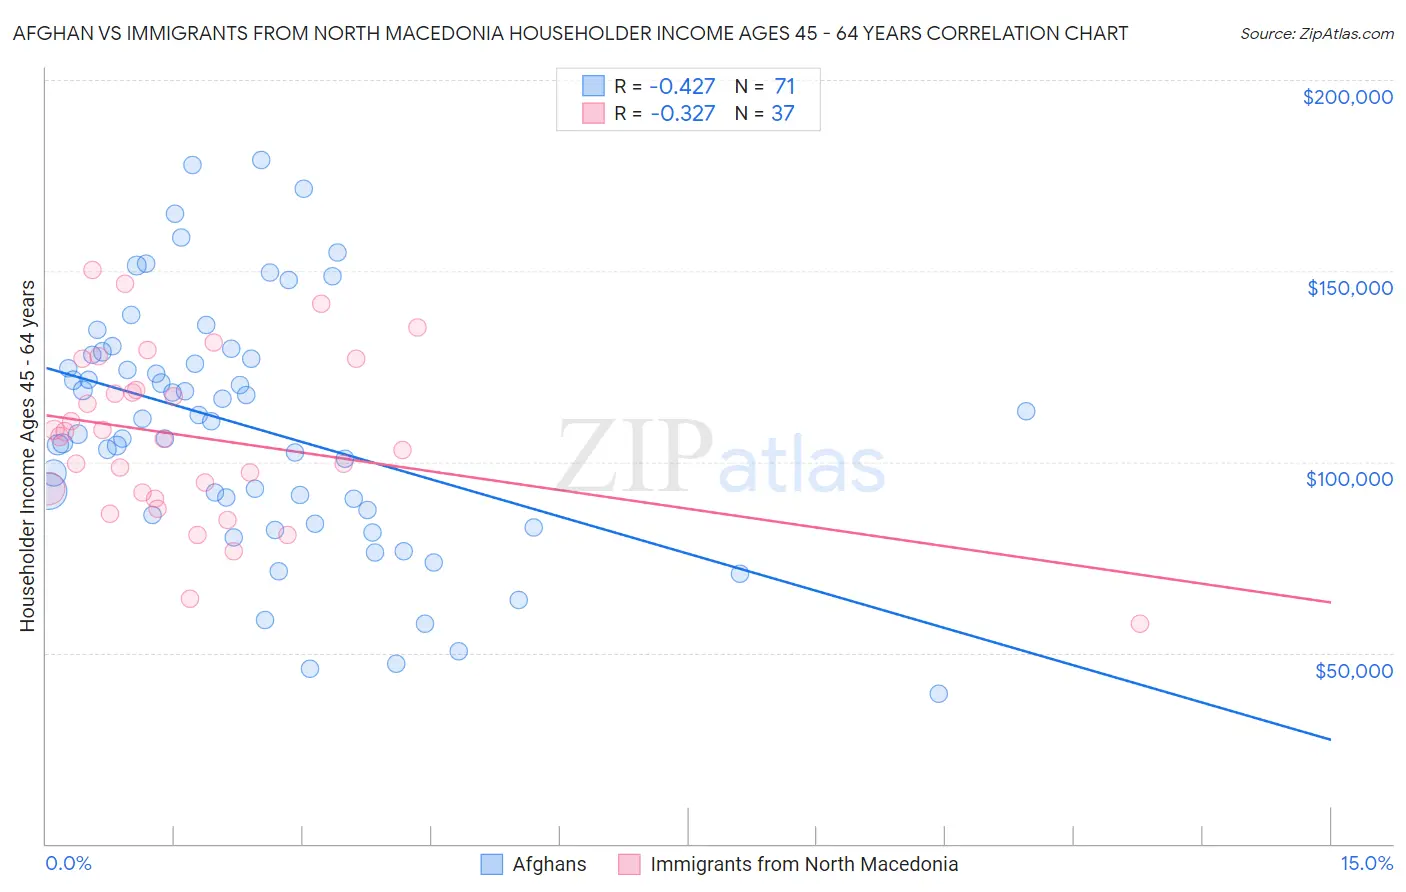 Afghan vs Immigrants from North Macedonia Householder Income Ages 45 - 64 years